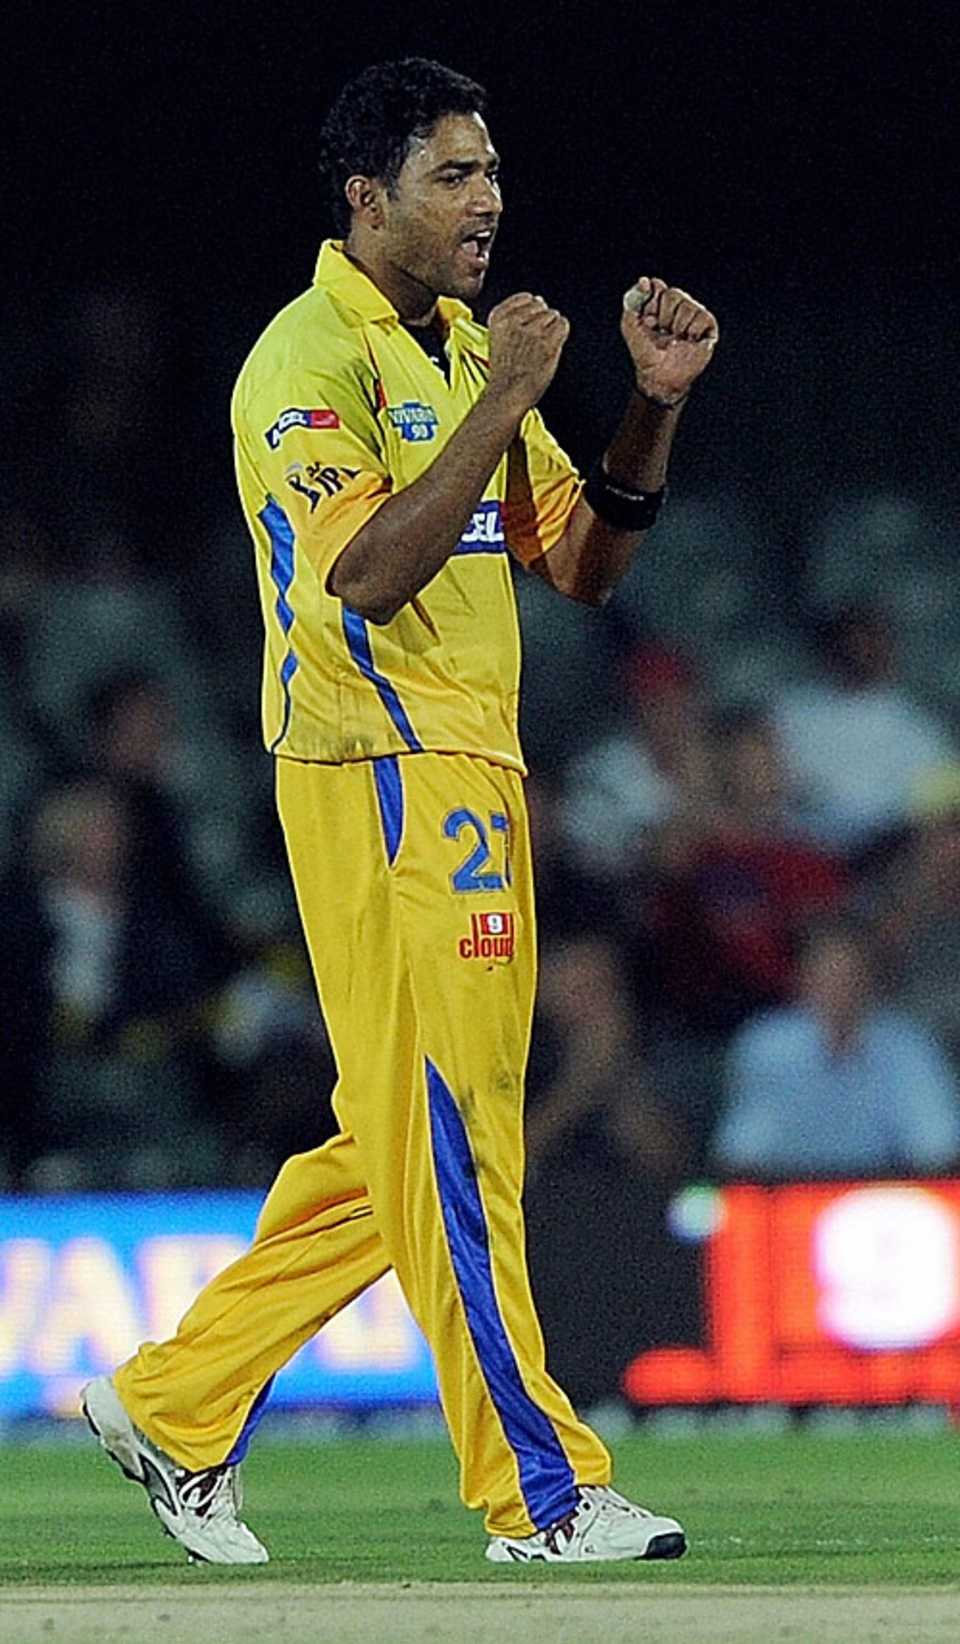 Shadab Jakati took his second consecutive four-wicket haul